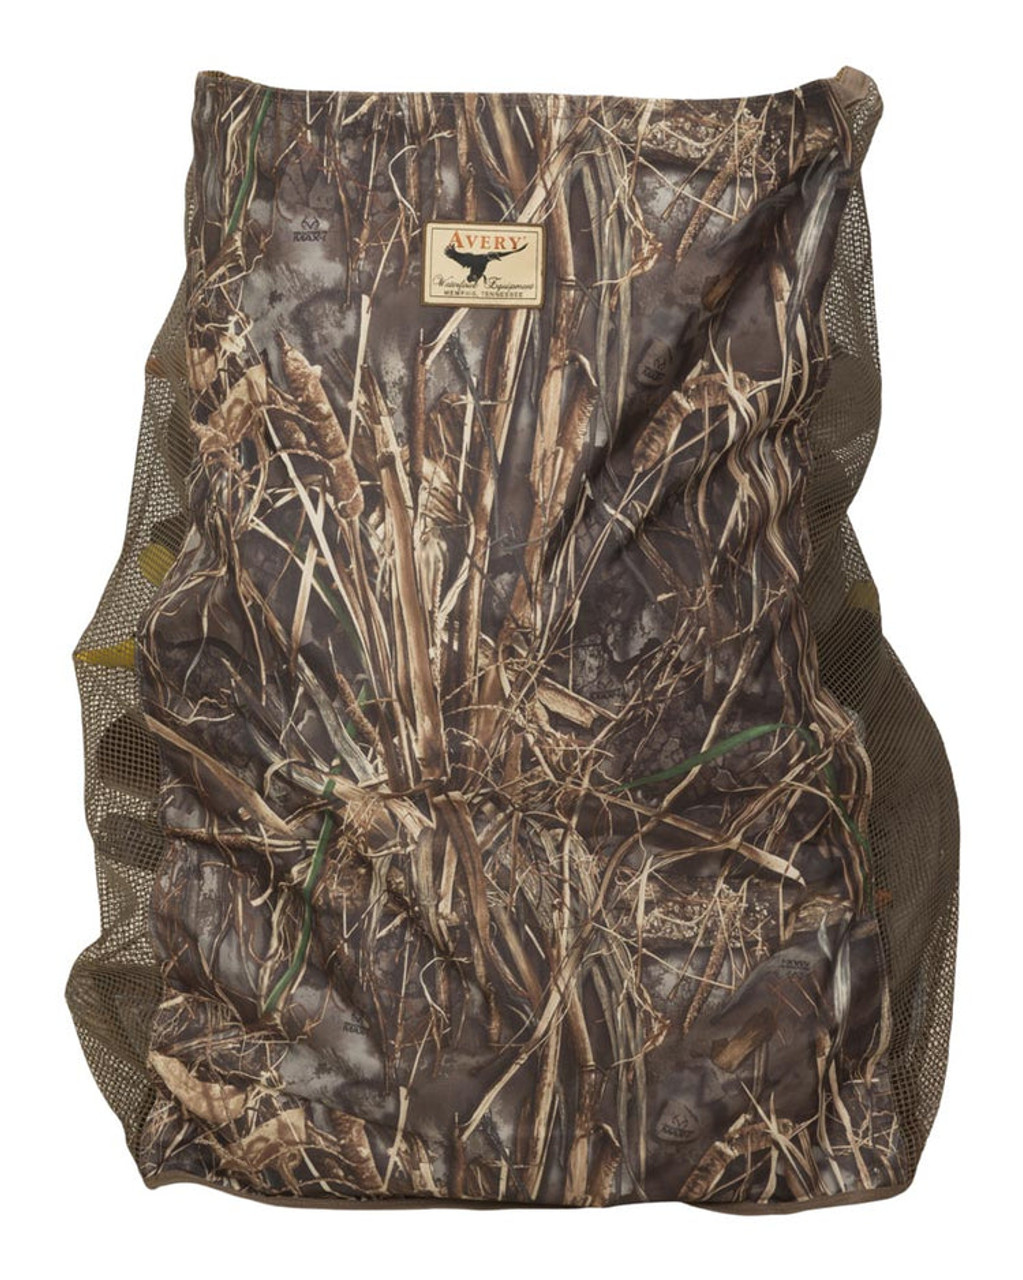 Avery Floating Decoy Bags